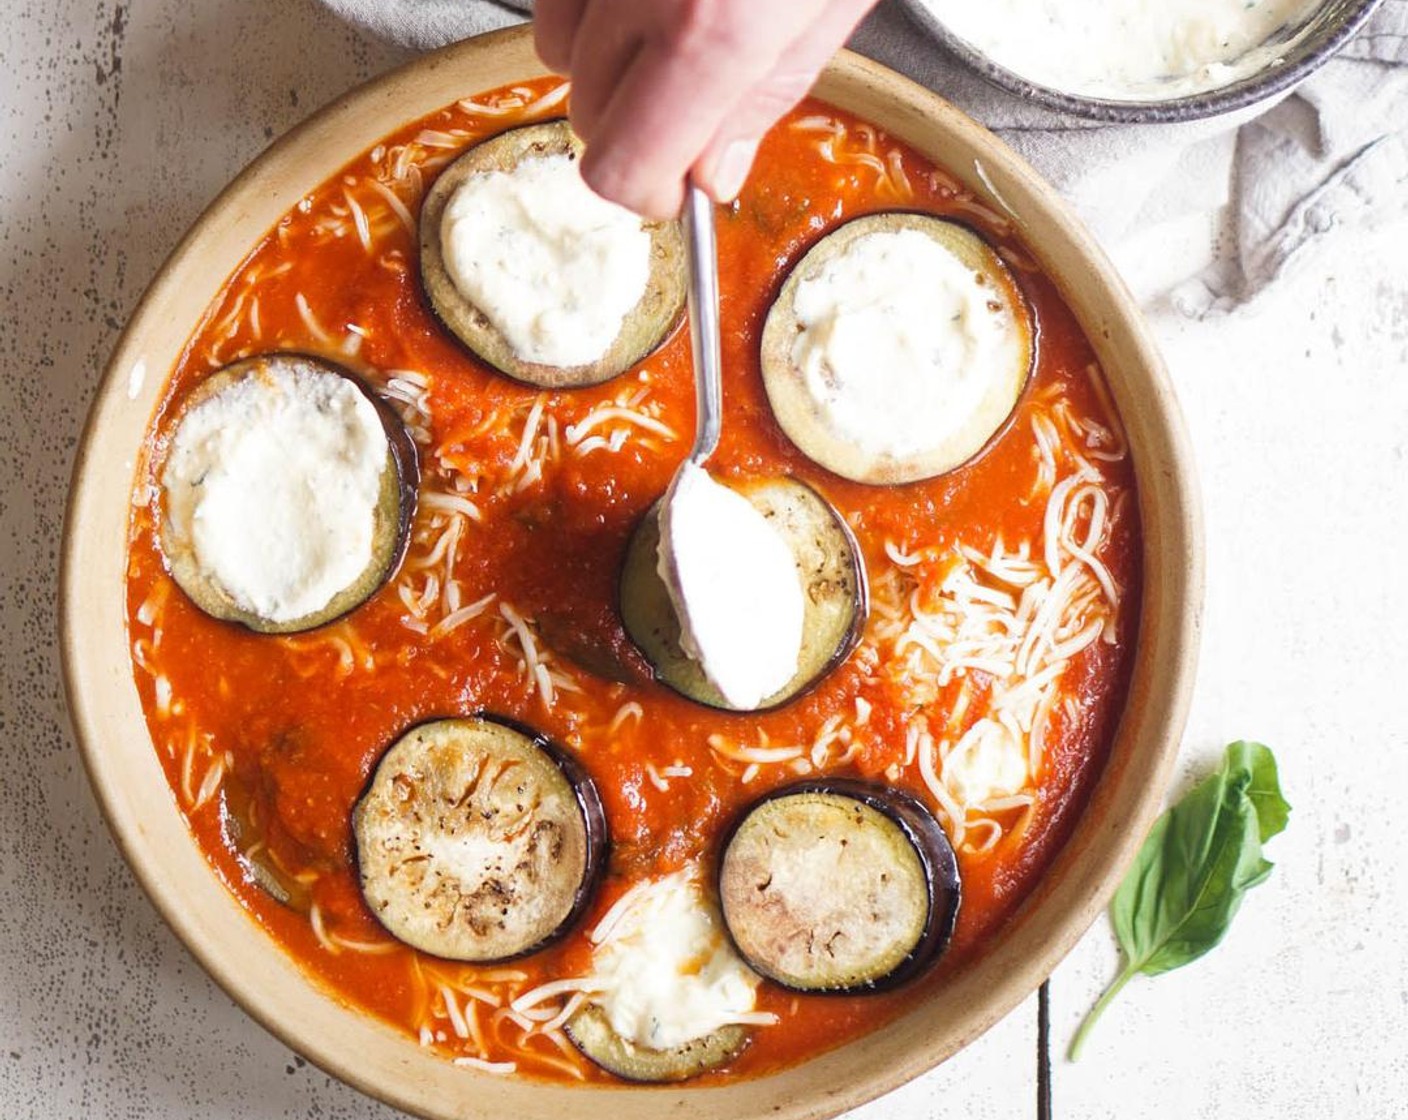 step 6 Spread 1/2 cup of the Tomato Sauce (2 3/4 cups) to the bottom of a 9x12 oval dish or 12" round dish. Arrange a layer of eggplant slices on top of the sauce, then top each slice with a heaping spoonful of ricotta cheese.